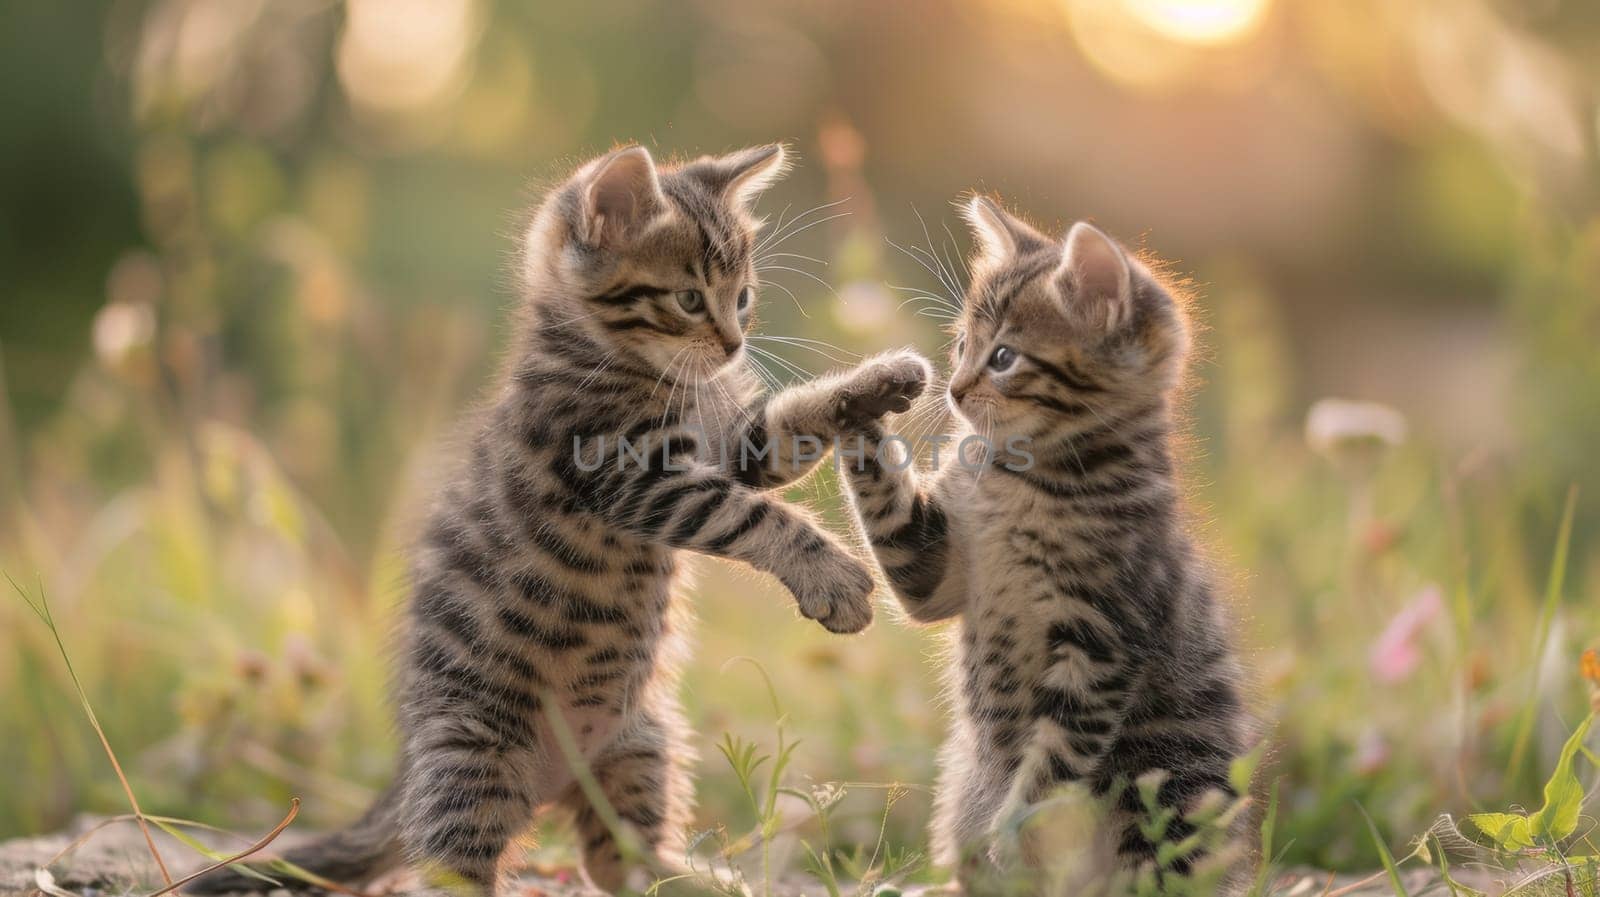 Two kittens playing with each other in the grassy area, AI by starush